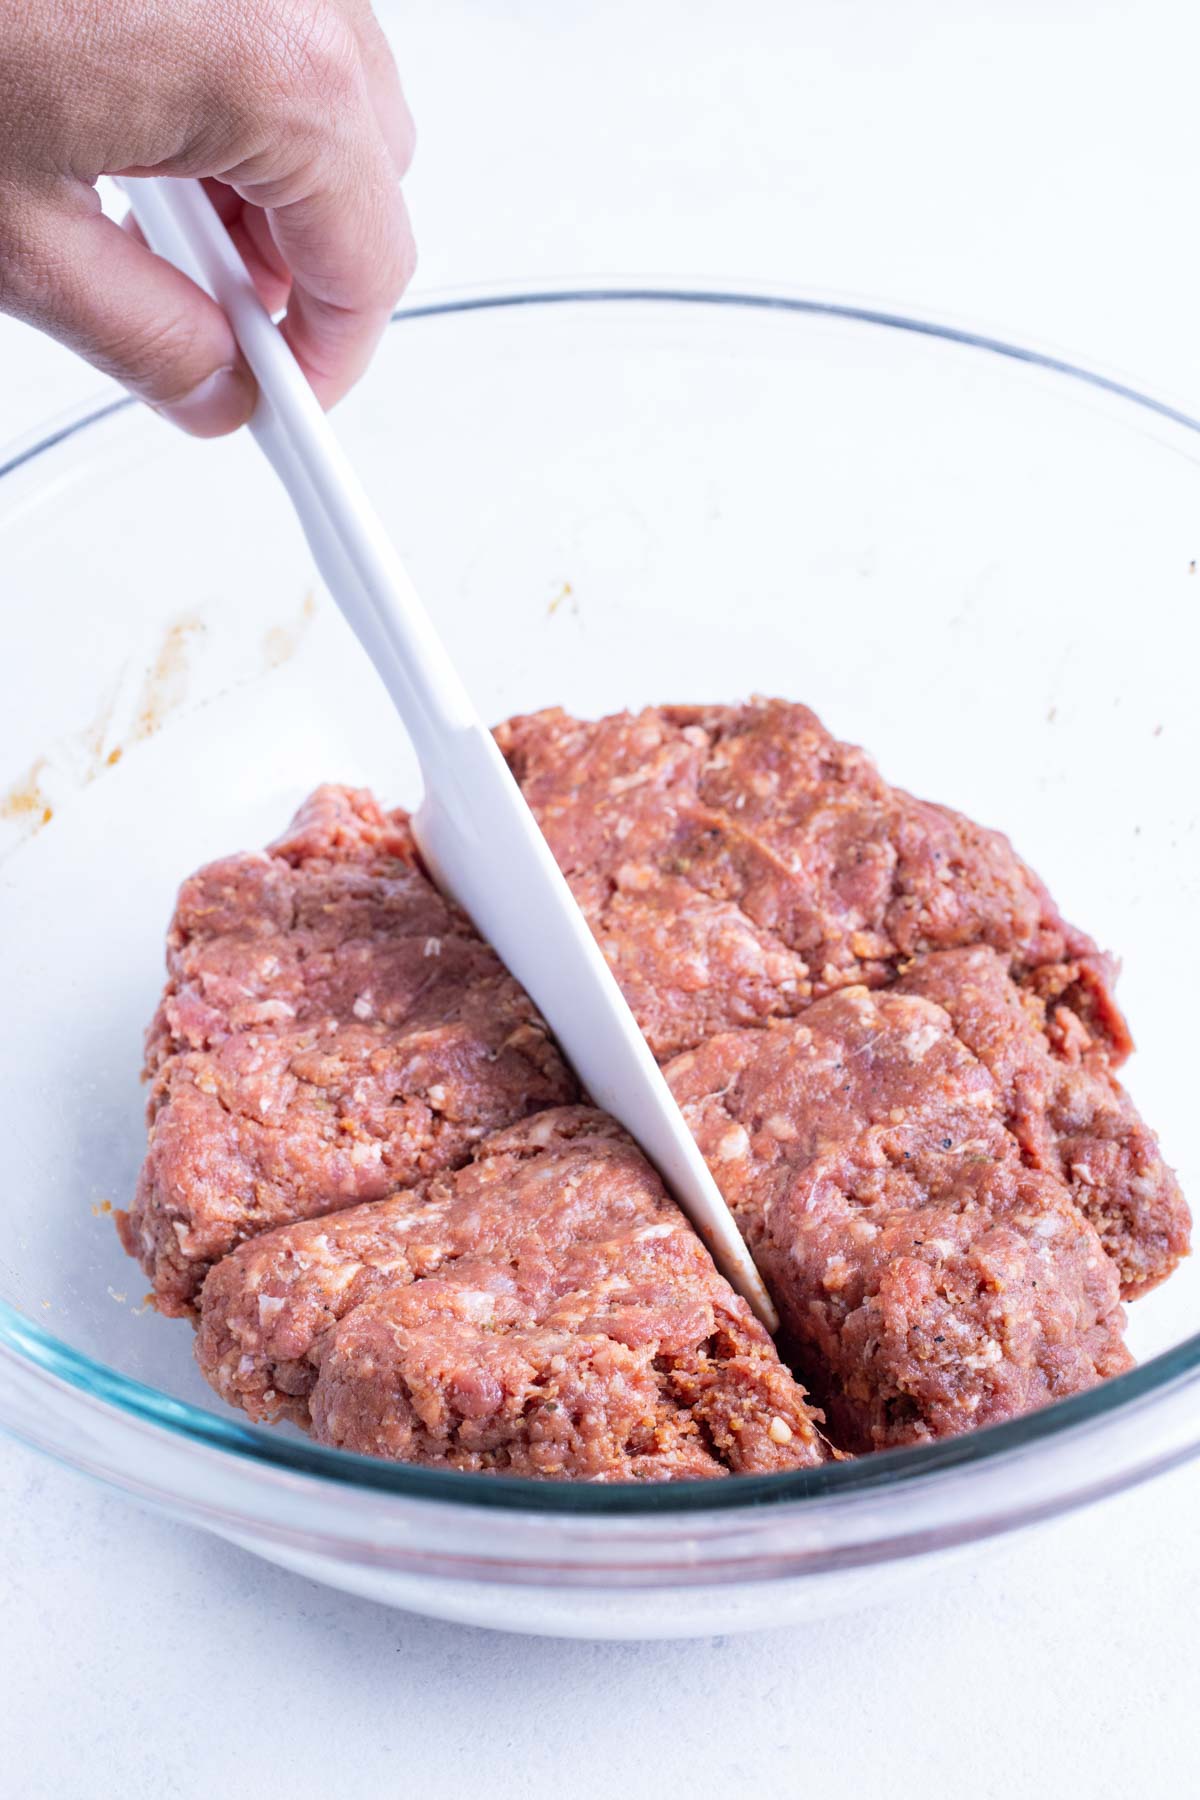 Hamburger meat is divided into four equal parts.